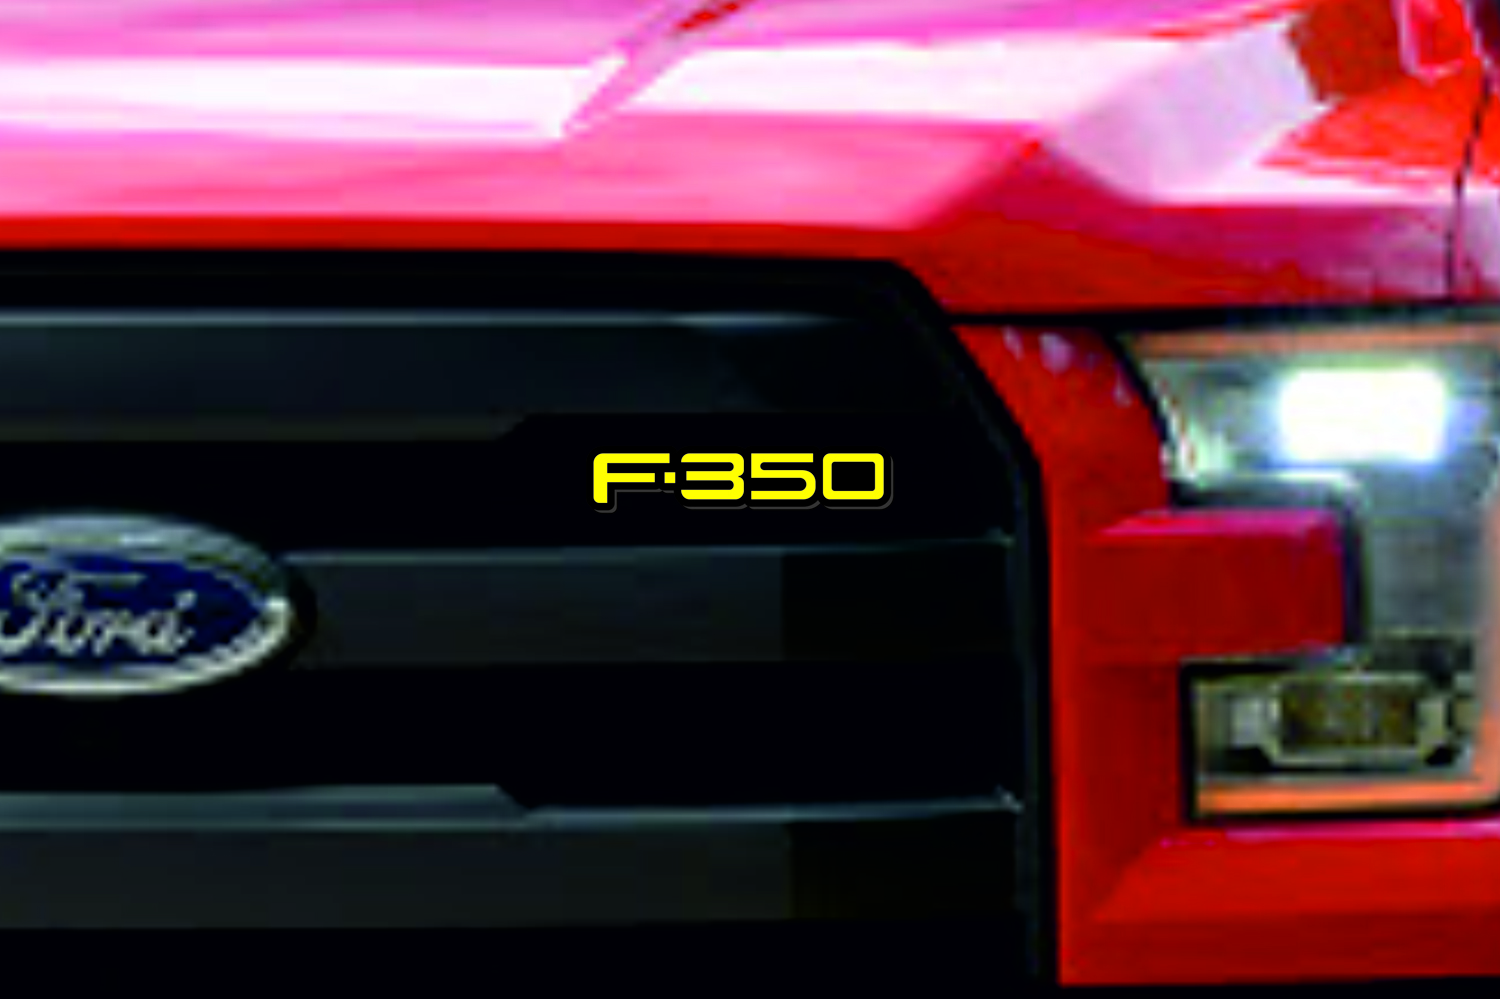 Ford Radiator grille emblem with F-350 logo